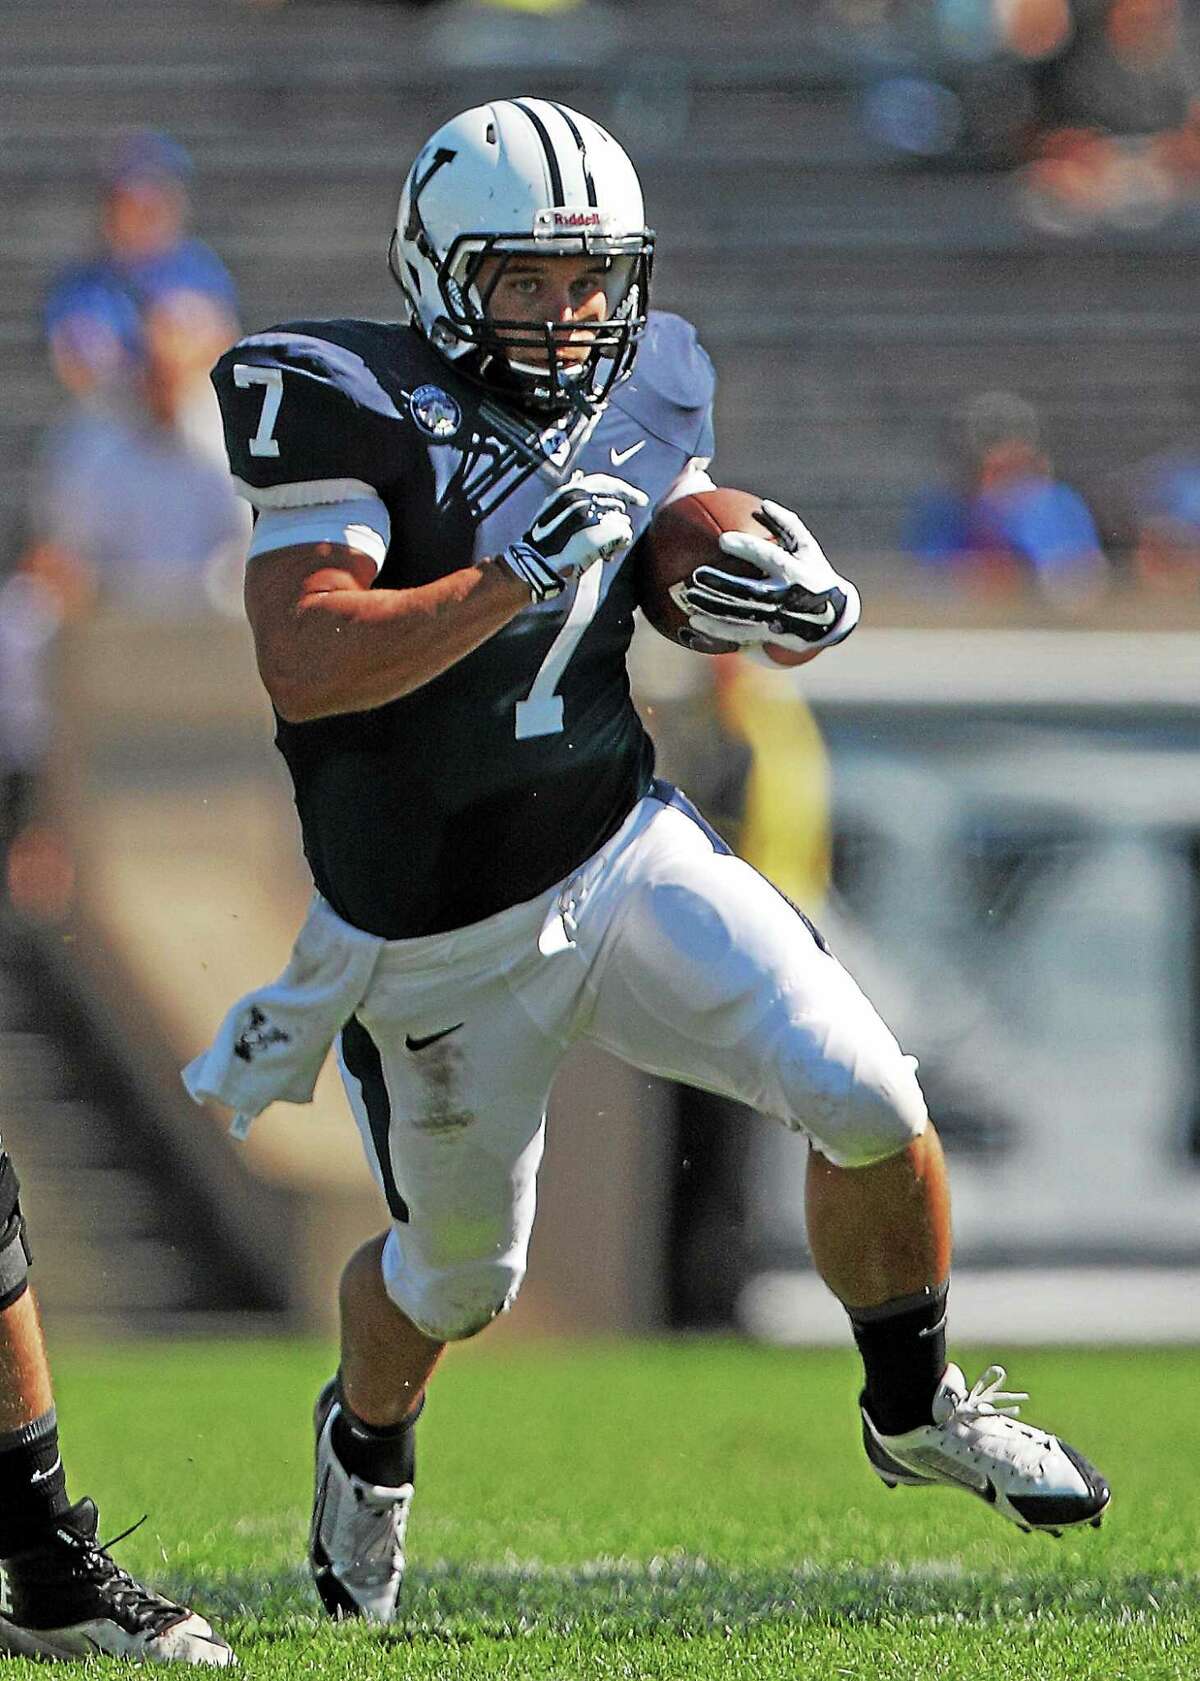 Yale running back Candler Rich is the most experienced of the returning Bulldog backs.